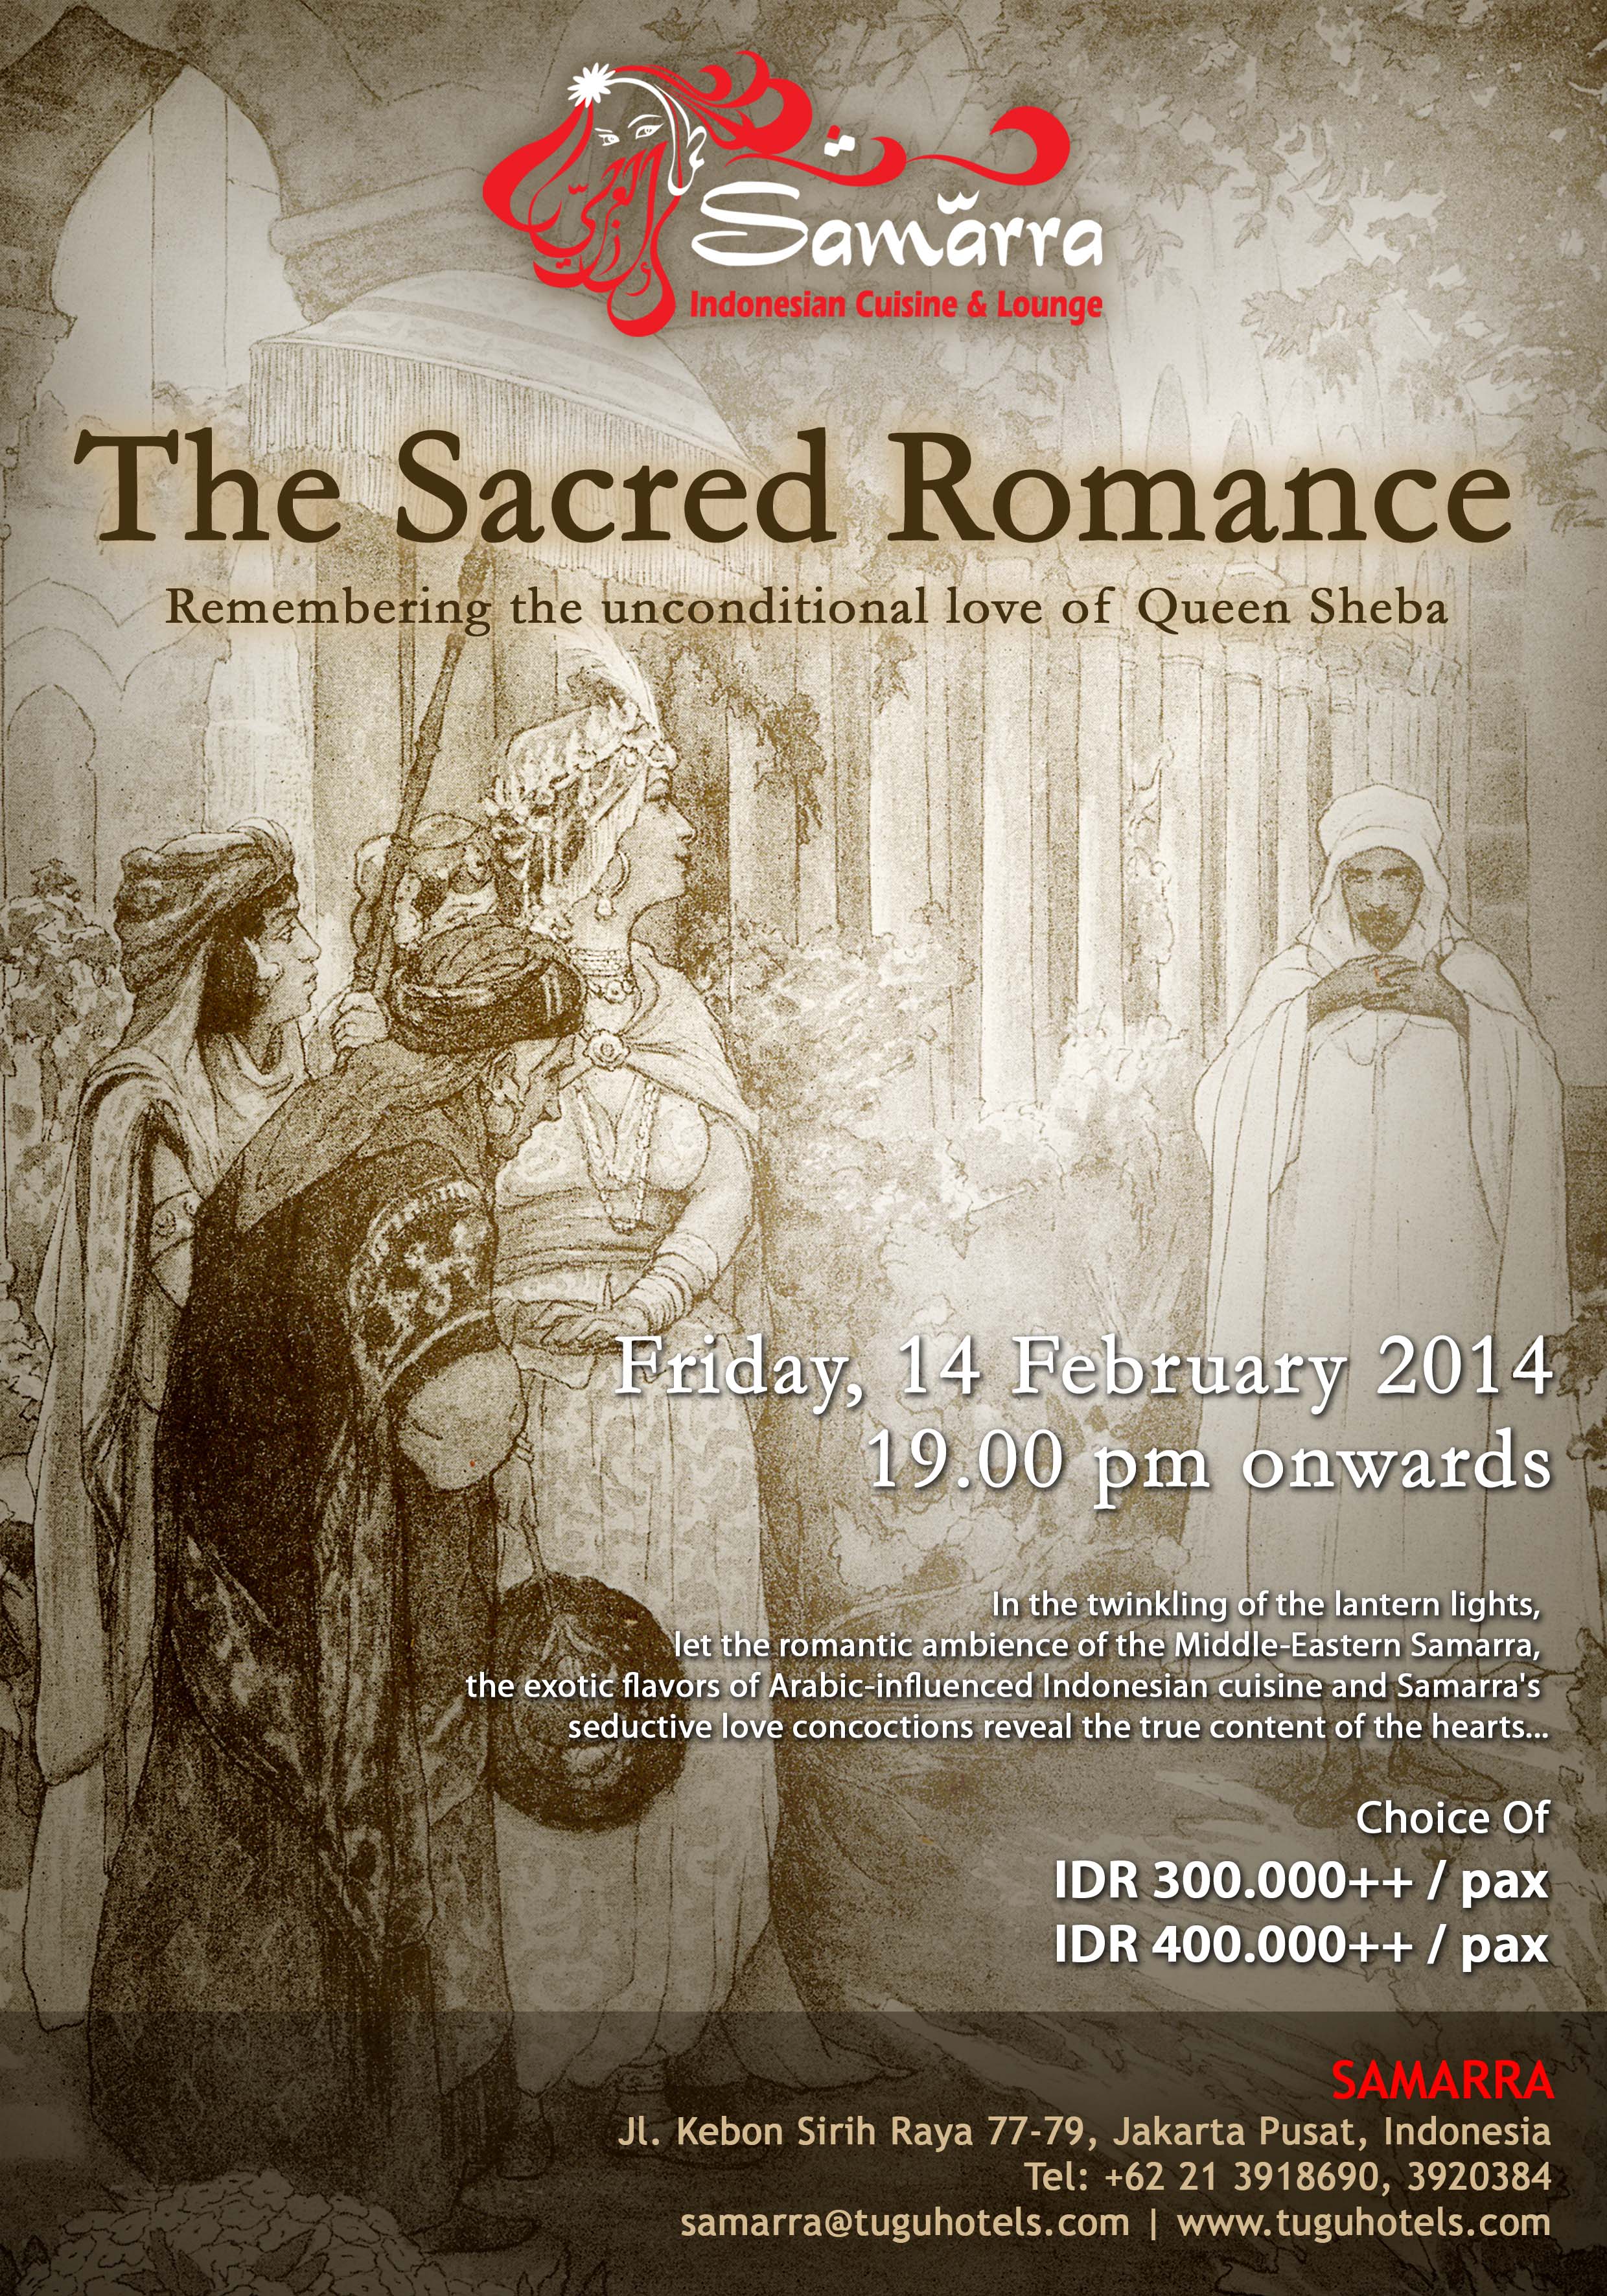 the sacred romance - remembering the unconditional love of queen sheba at samarra restaurant